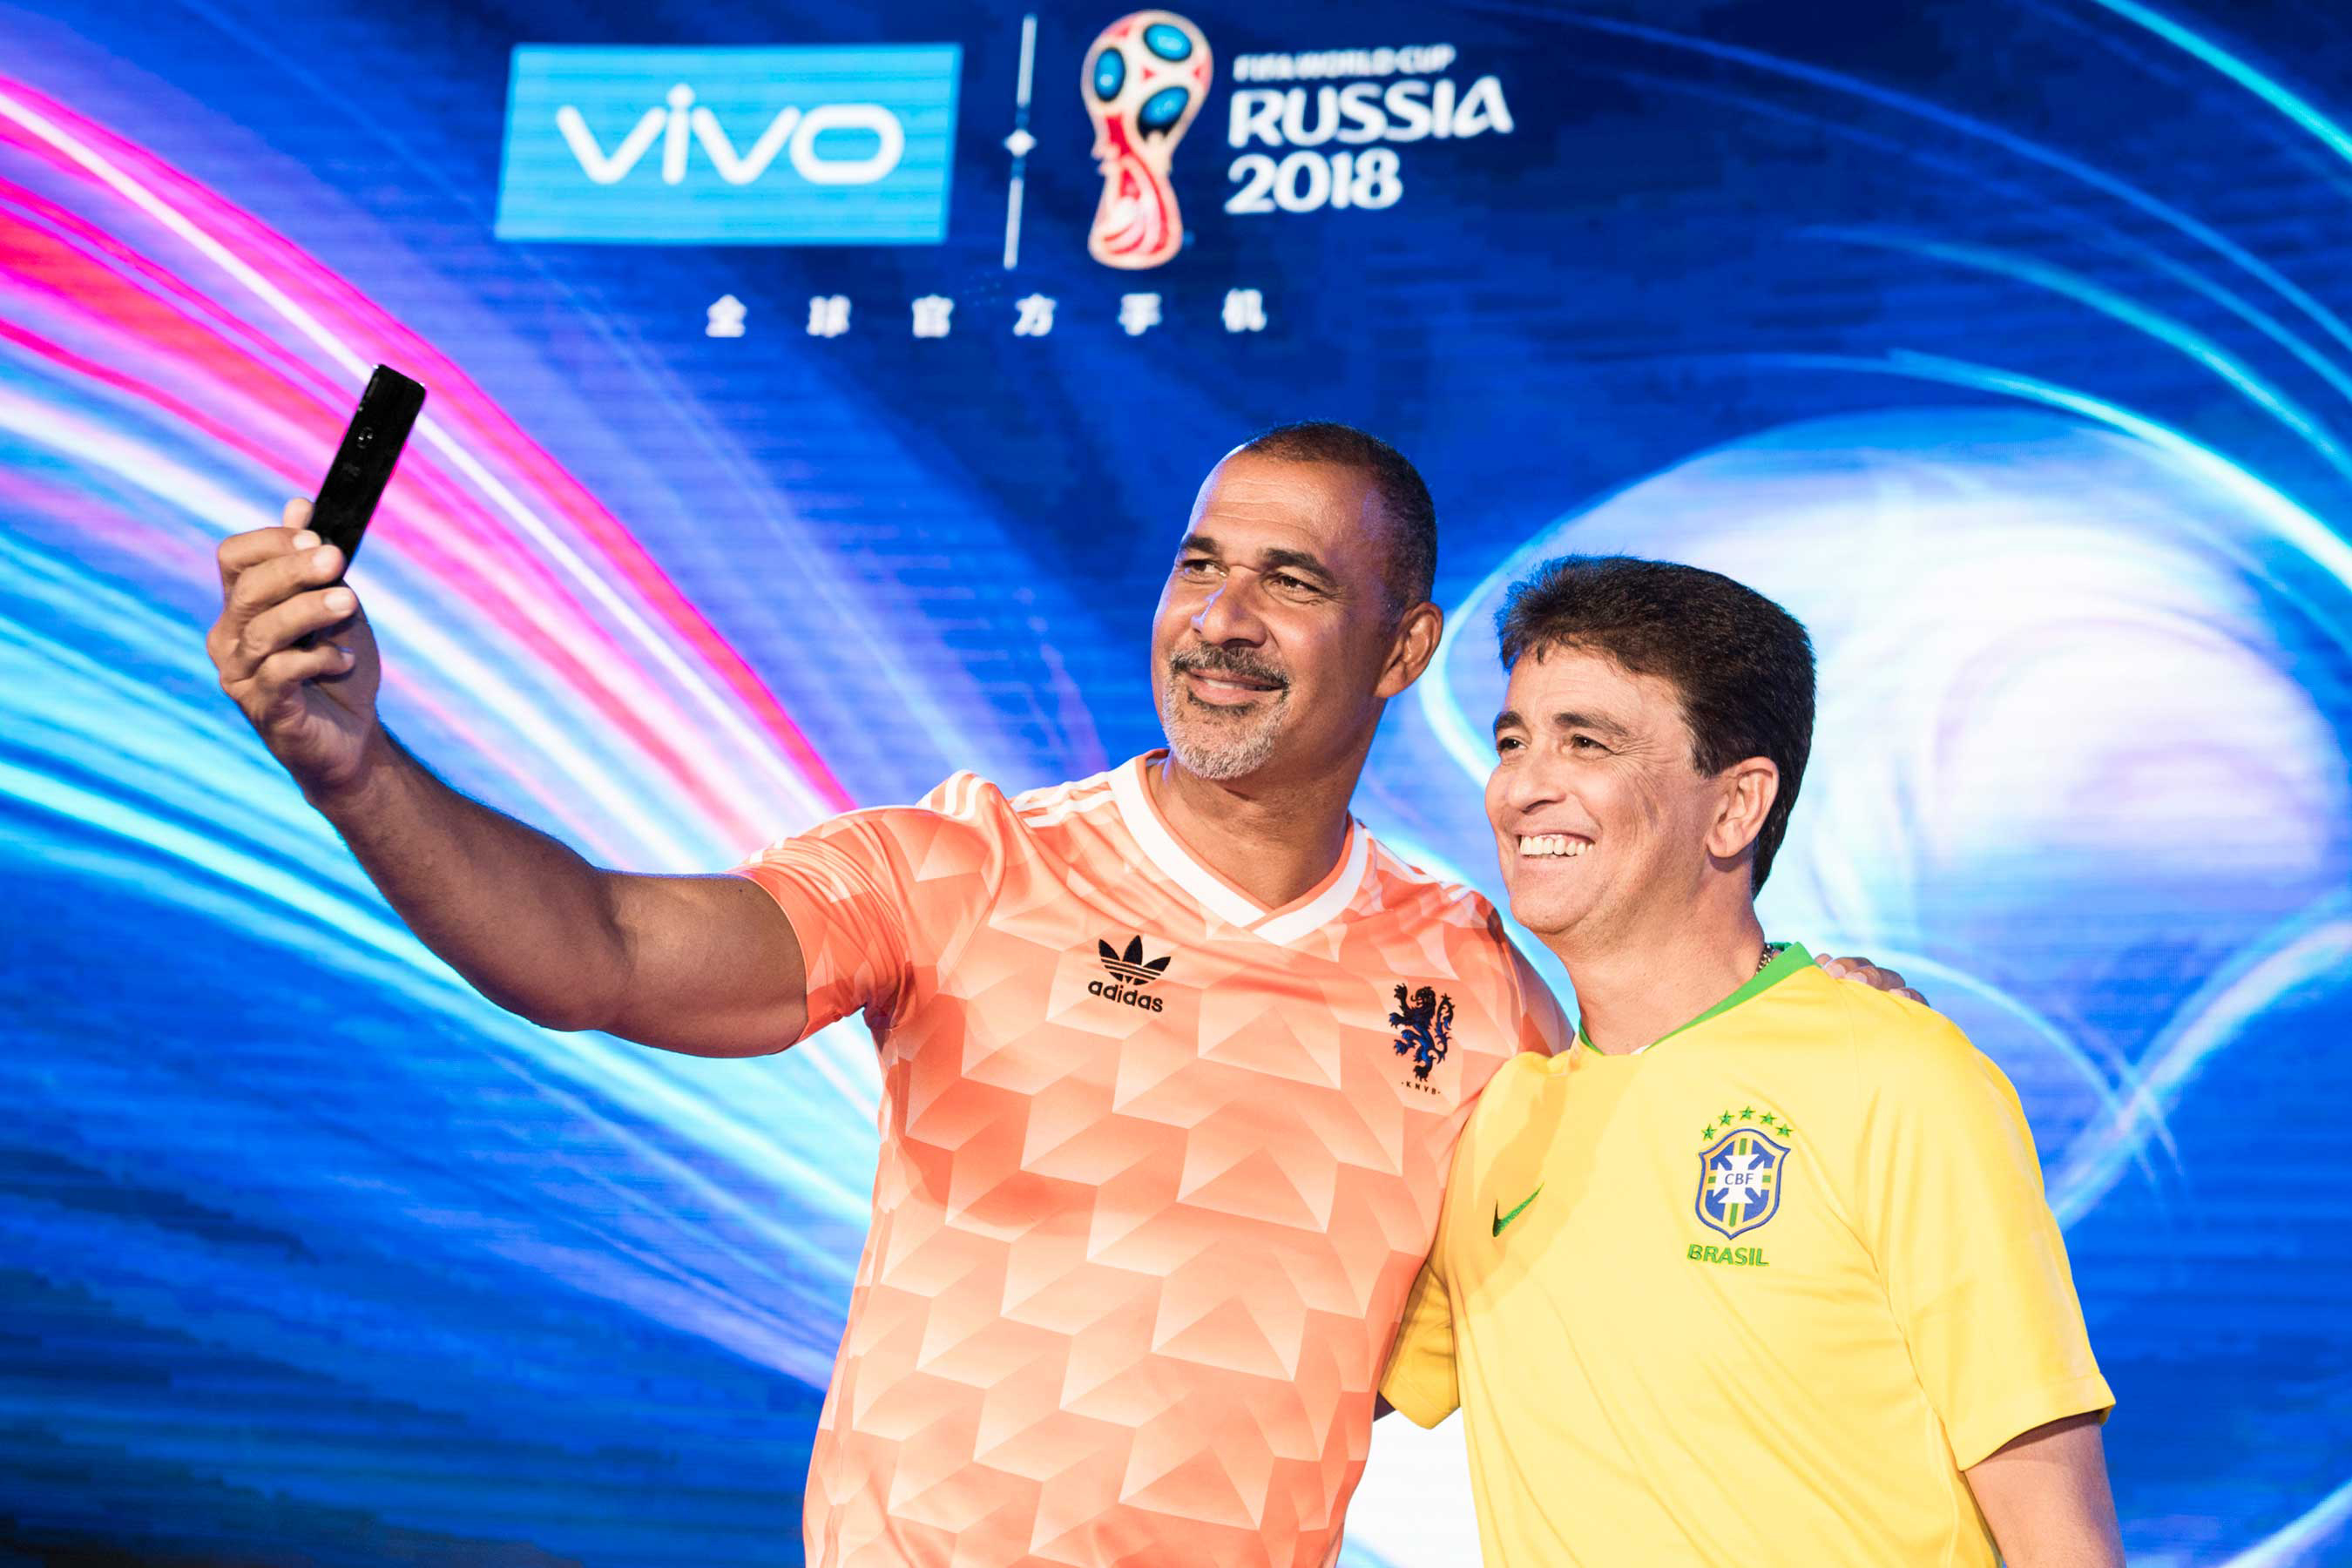 Former Balon d'or winner Ruud Gullit and FIFA World Cup Winner Bebeto taking a selfie with the Vivo X21